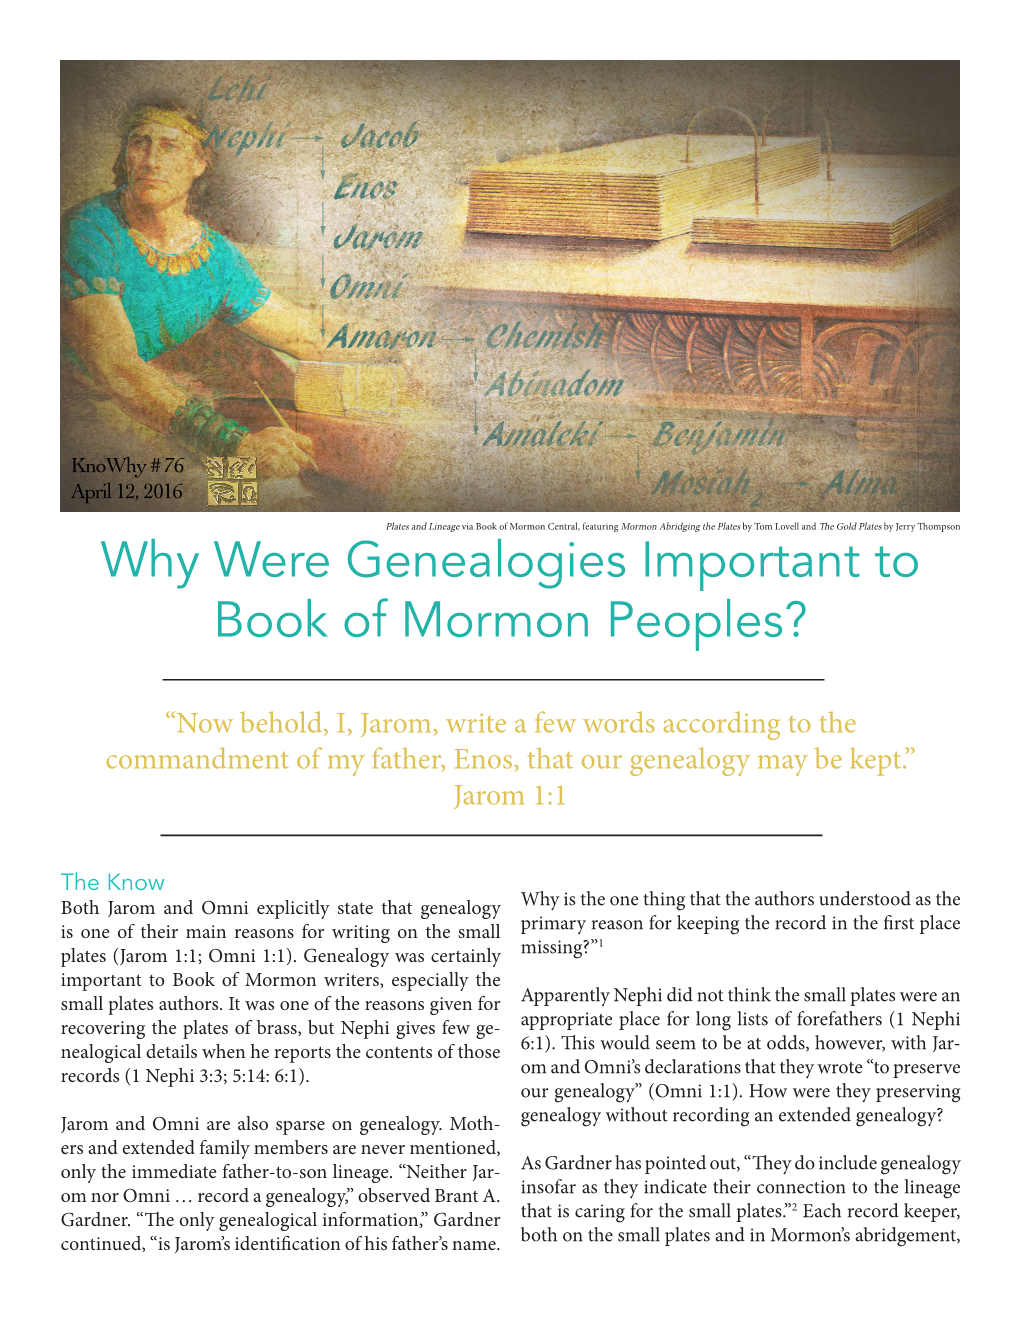 Why Were Genealogies Important to Book of Mormon Peoples?